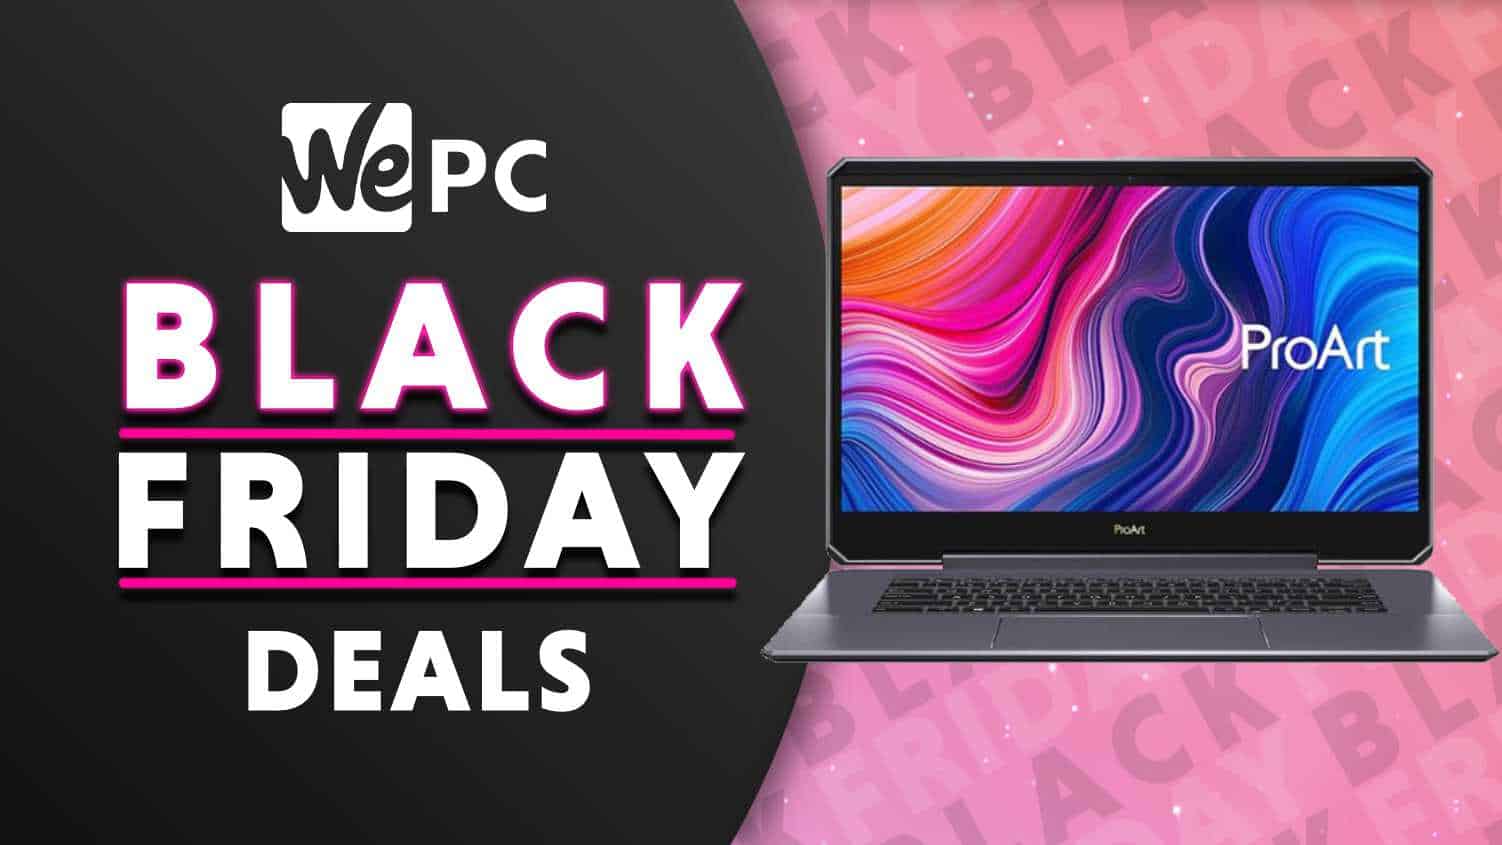 Save 35% on an Asus ProArt StudioBook early Black Friday 2021